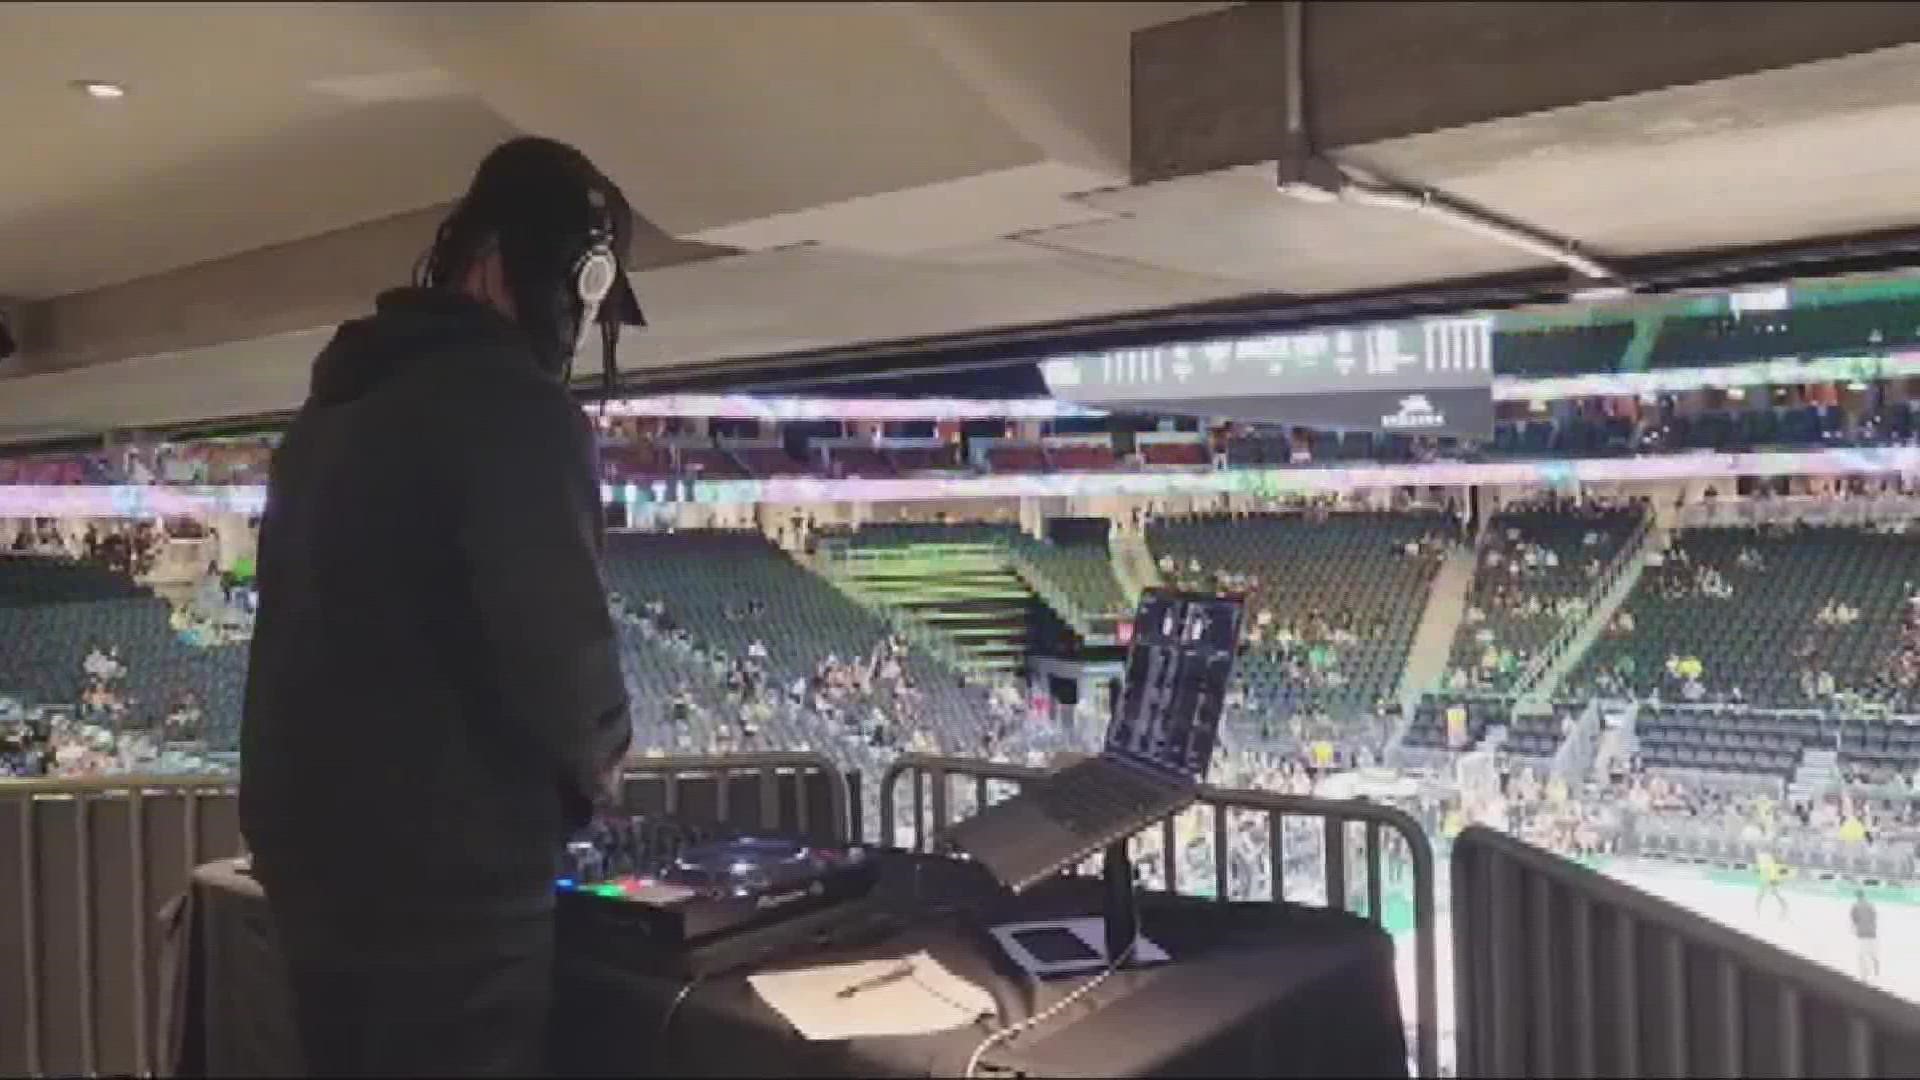 "DJ Trunks" has been pumping up crowds at packed Seattle sports events for a full year. Paul Cranford shares what he's enjoyed most and how fans are interacting.